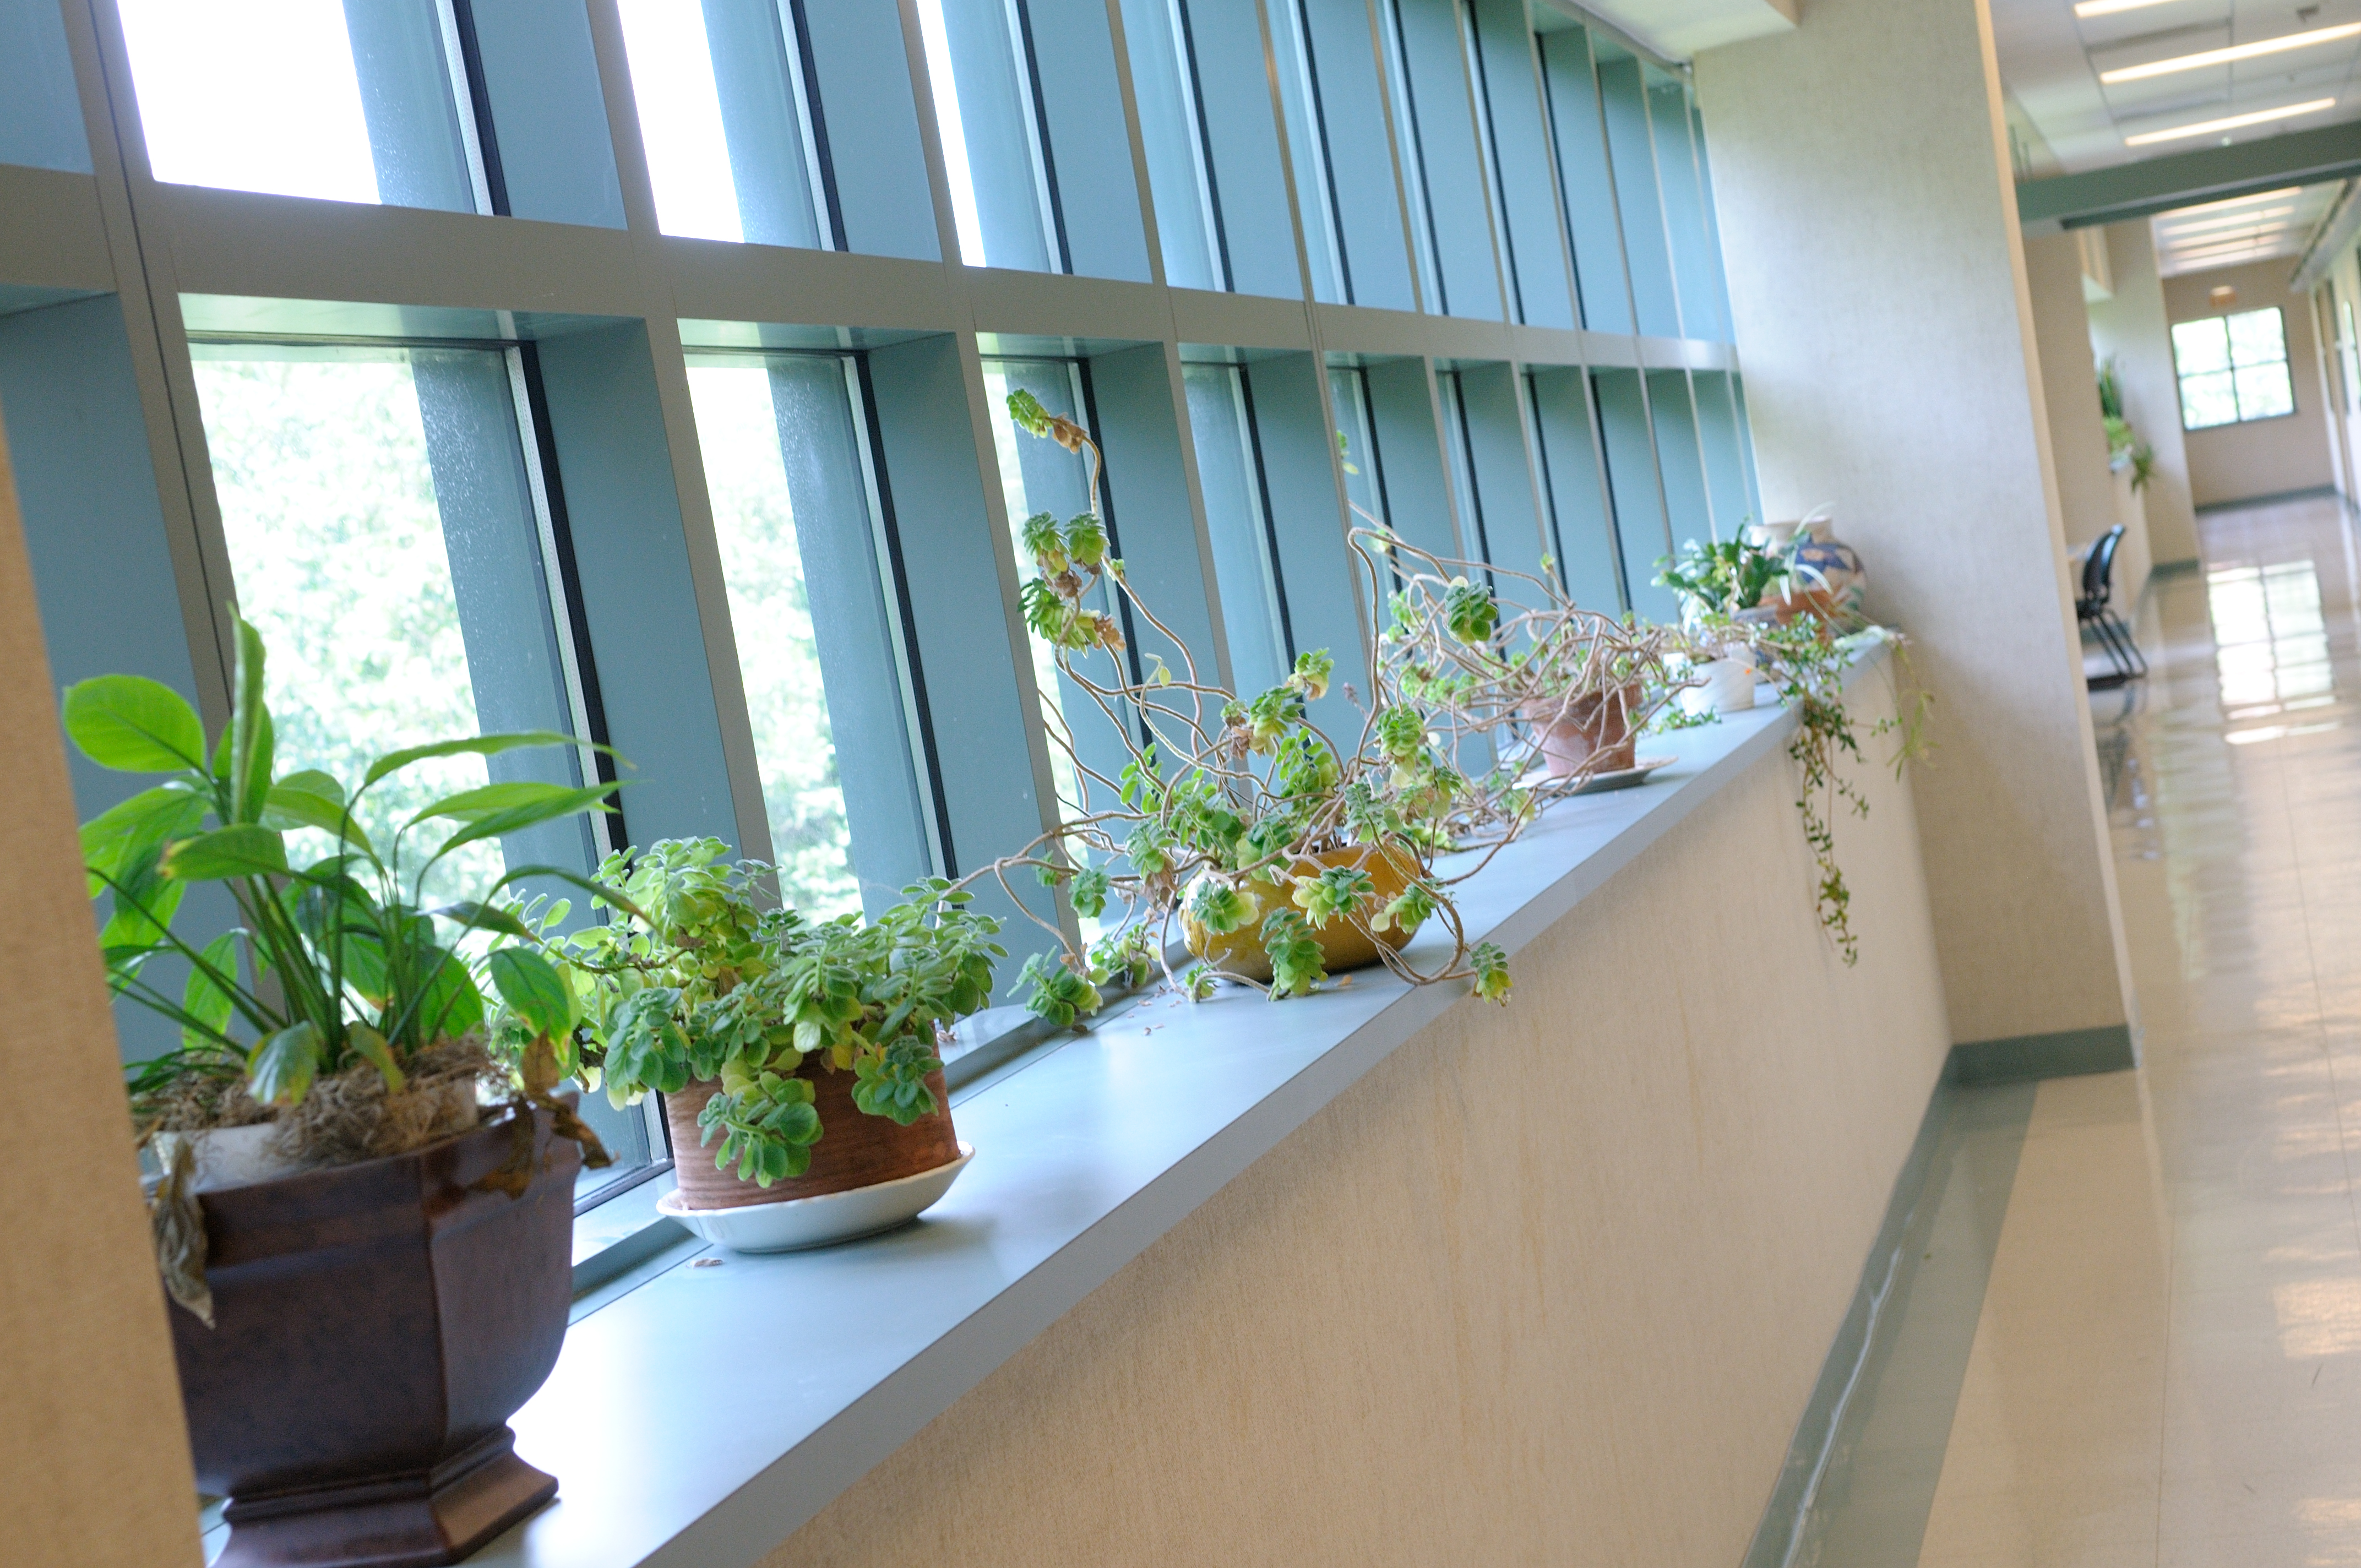 Plants on window sill at Beckman Institute